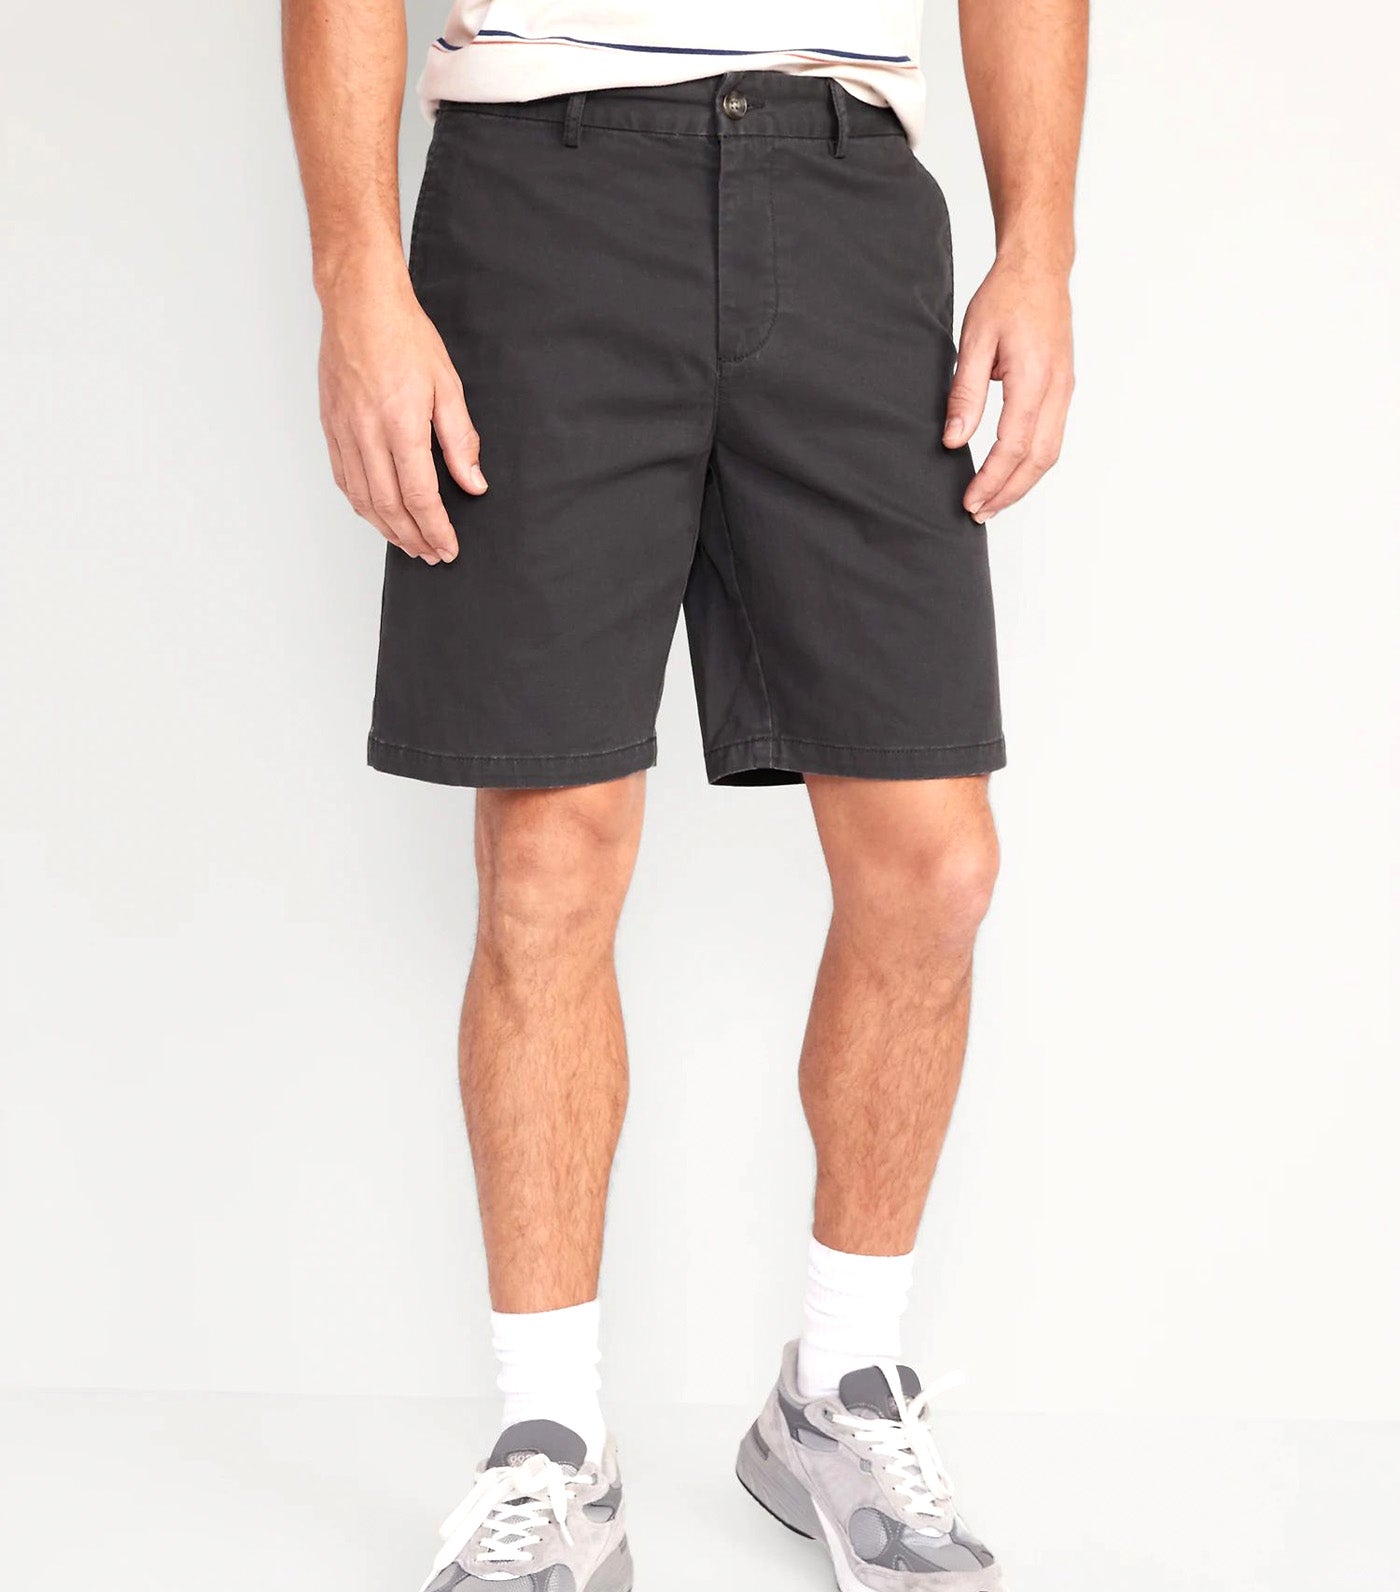 Slim Built-In Flex Rotation Chino Shorts for Men - 9-Inch Inseam Panther